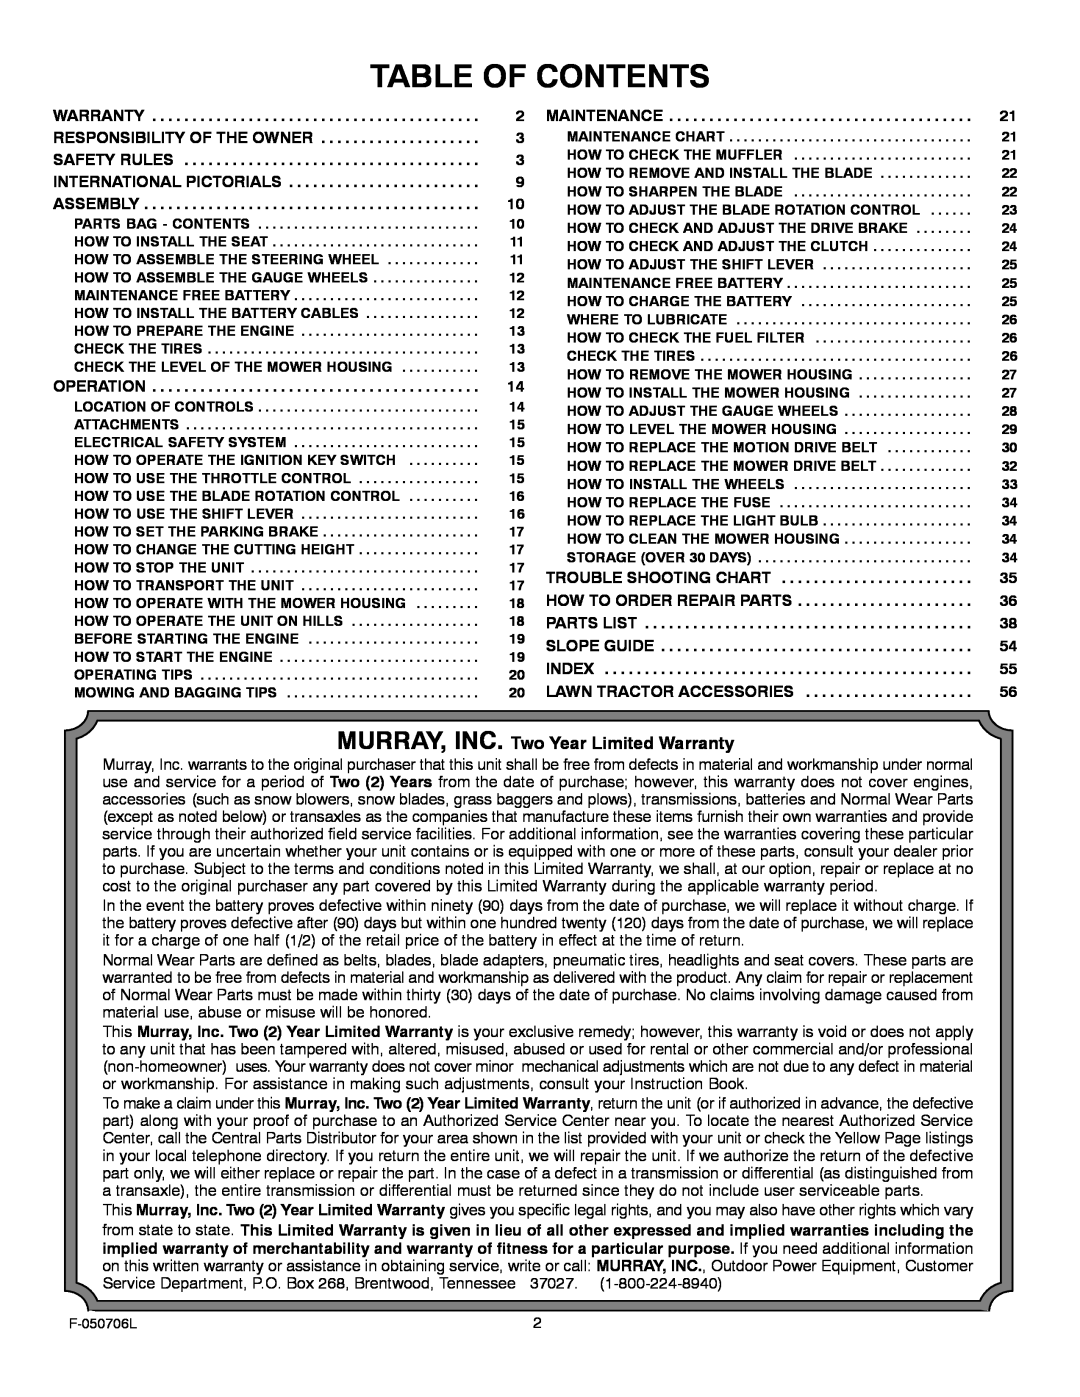 Murray 425014x92B manual Table Of Contents, MURRAY, INC. Two Year Limited Warranty 